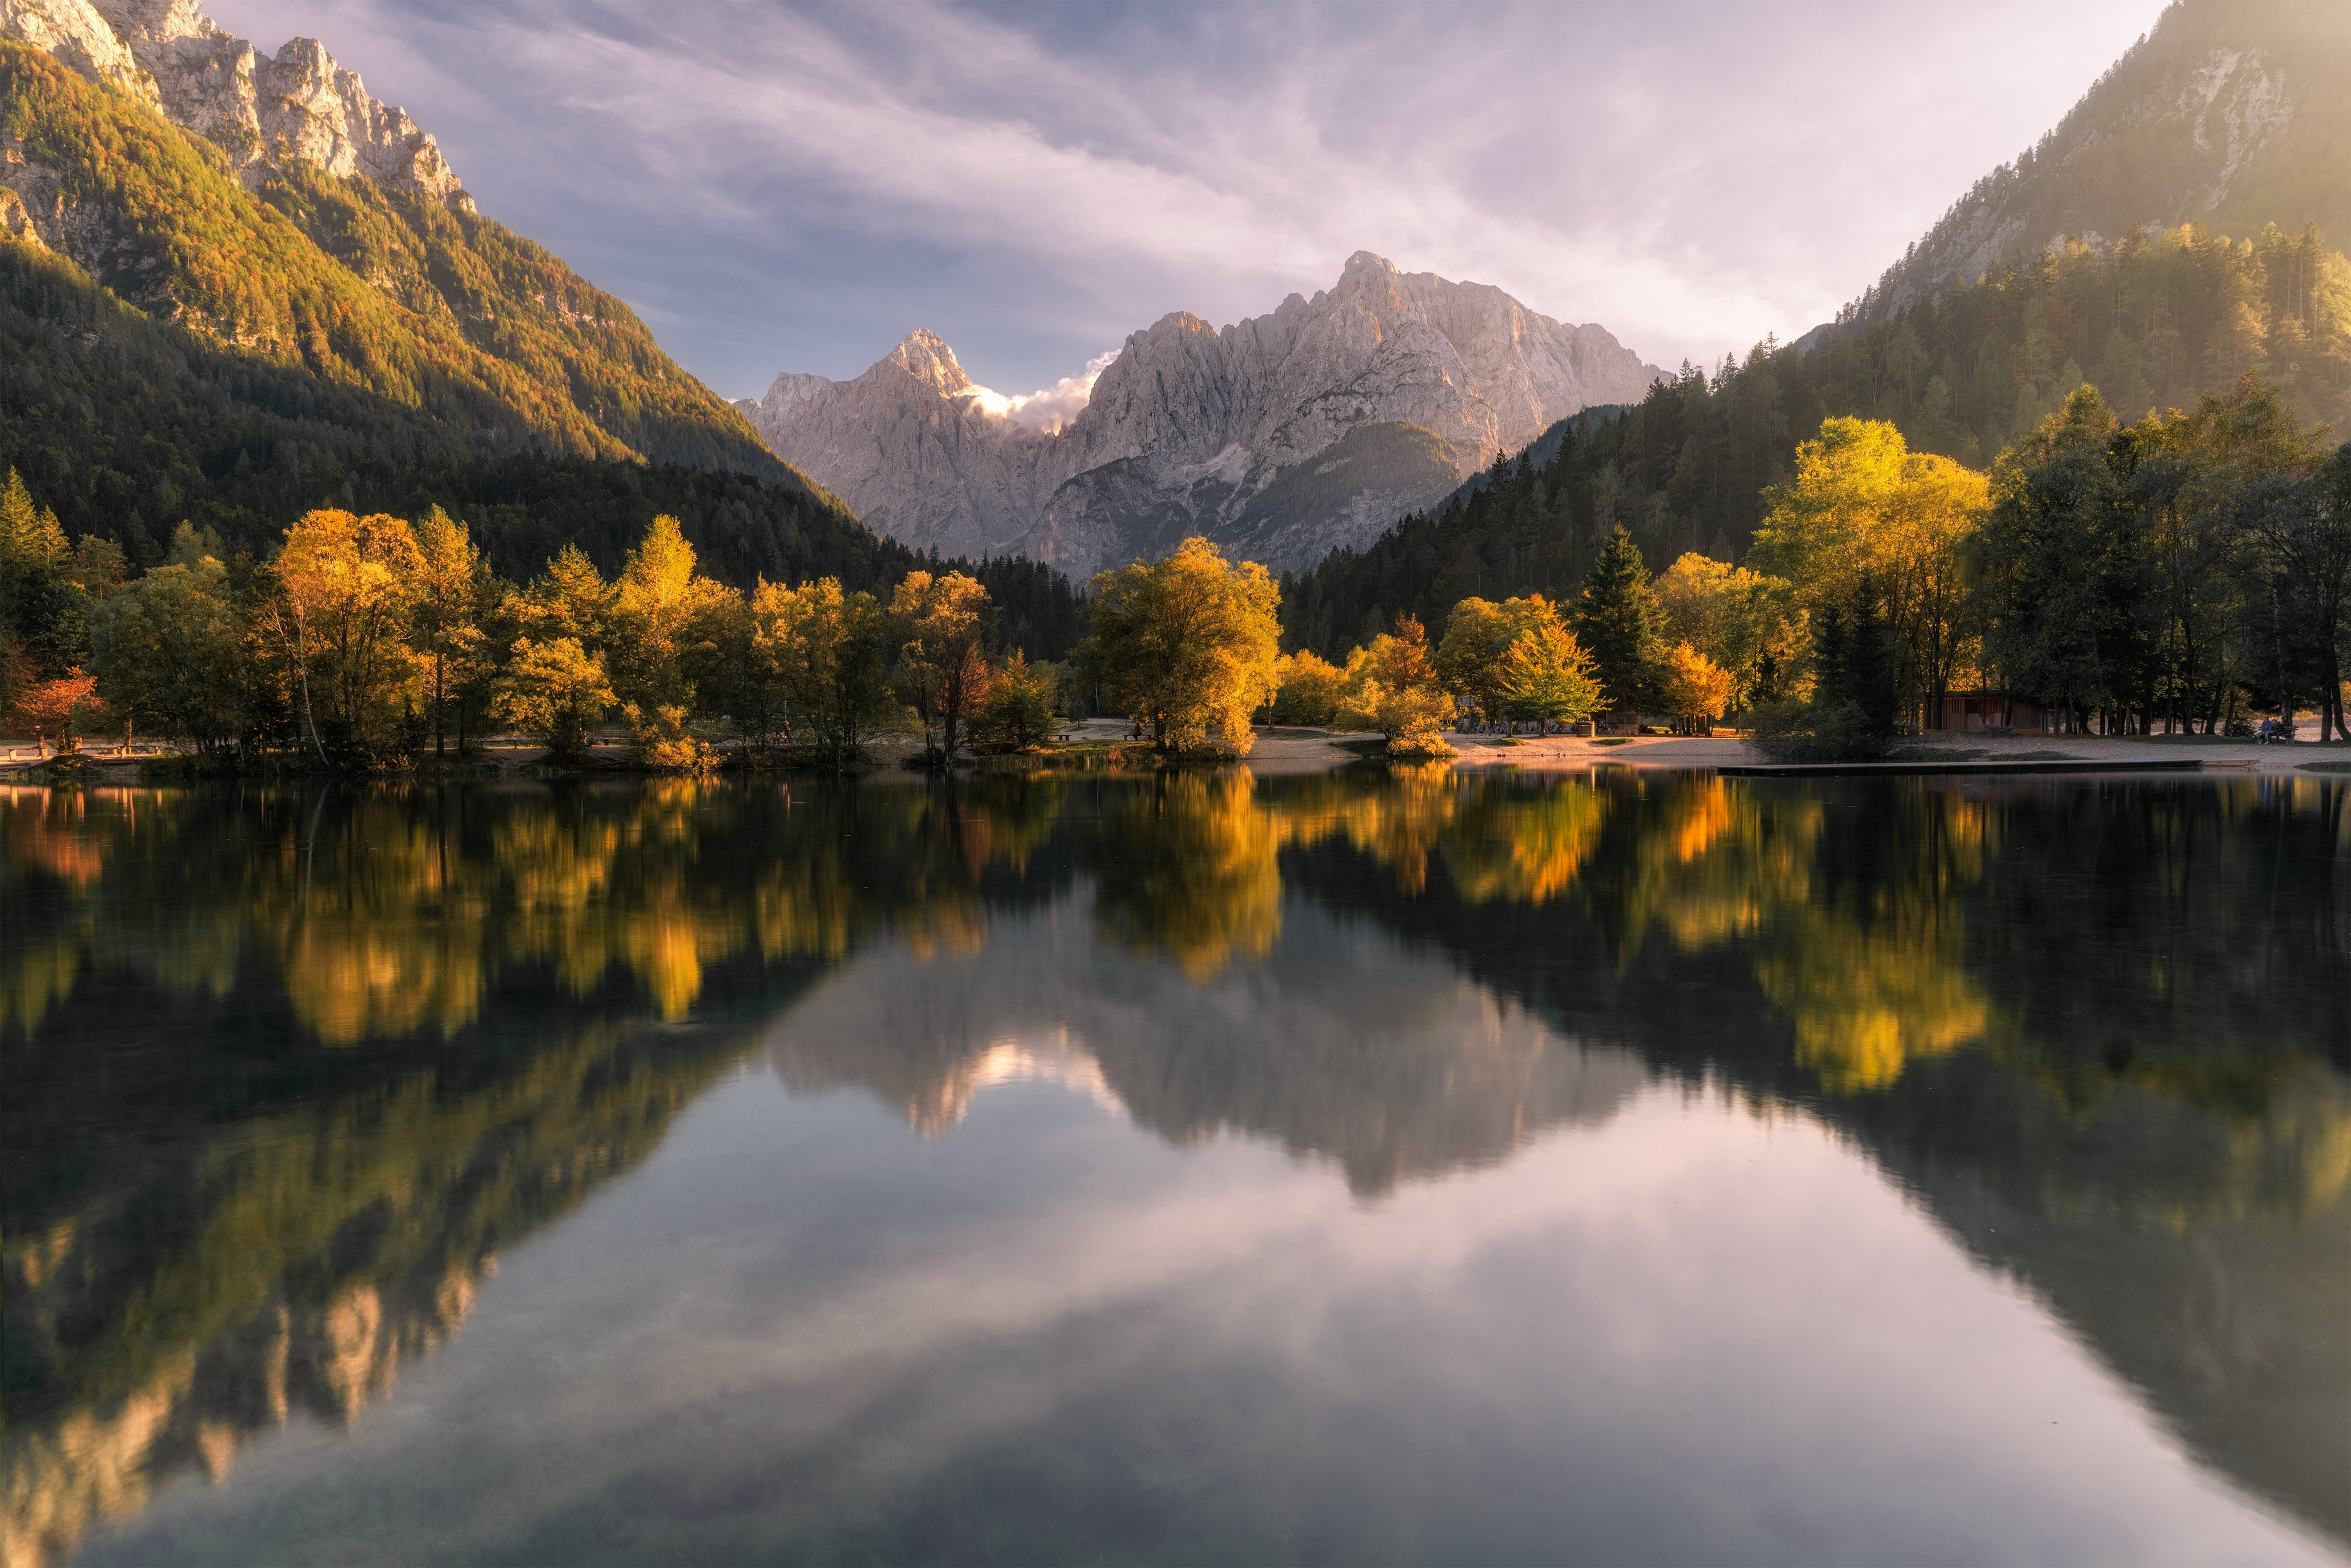 General 4096x2732 nature landscape trees water reflection fall mountains clouds sky long exposure morning Lake Jasna Slovenia